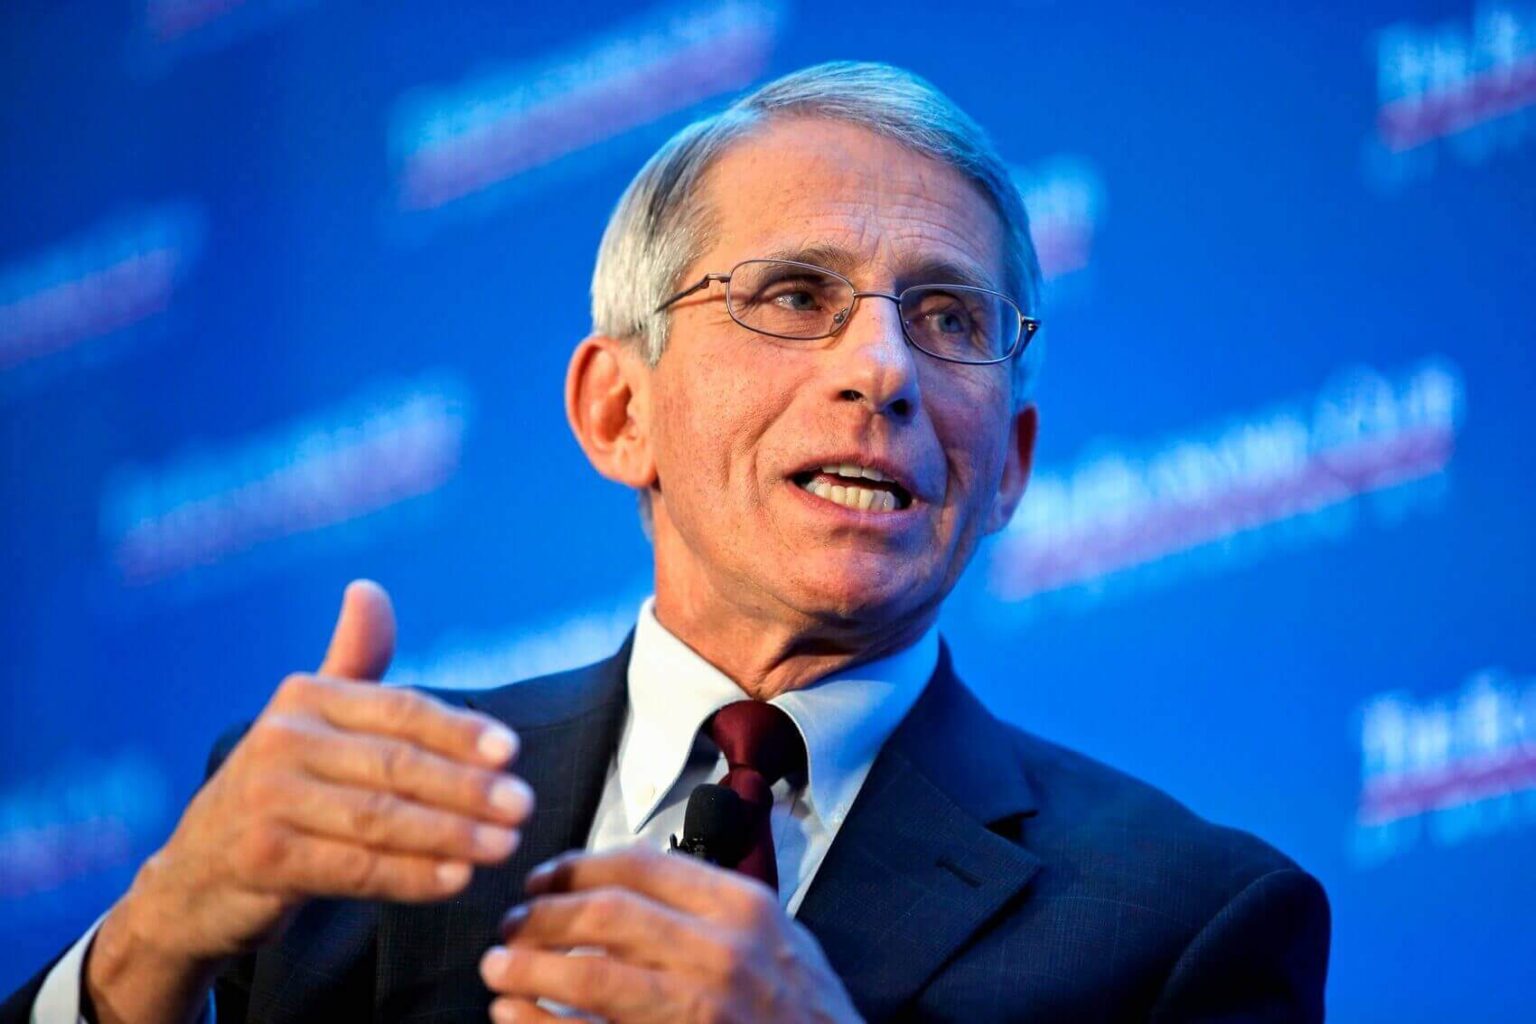 Coronavirus has made this year more difficult for everyone around the world. Here’s what Dr. Fauci has said about the vaccine and potential cure.